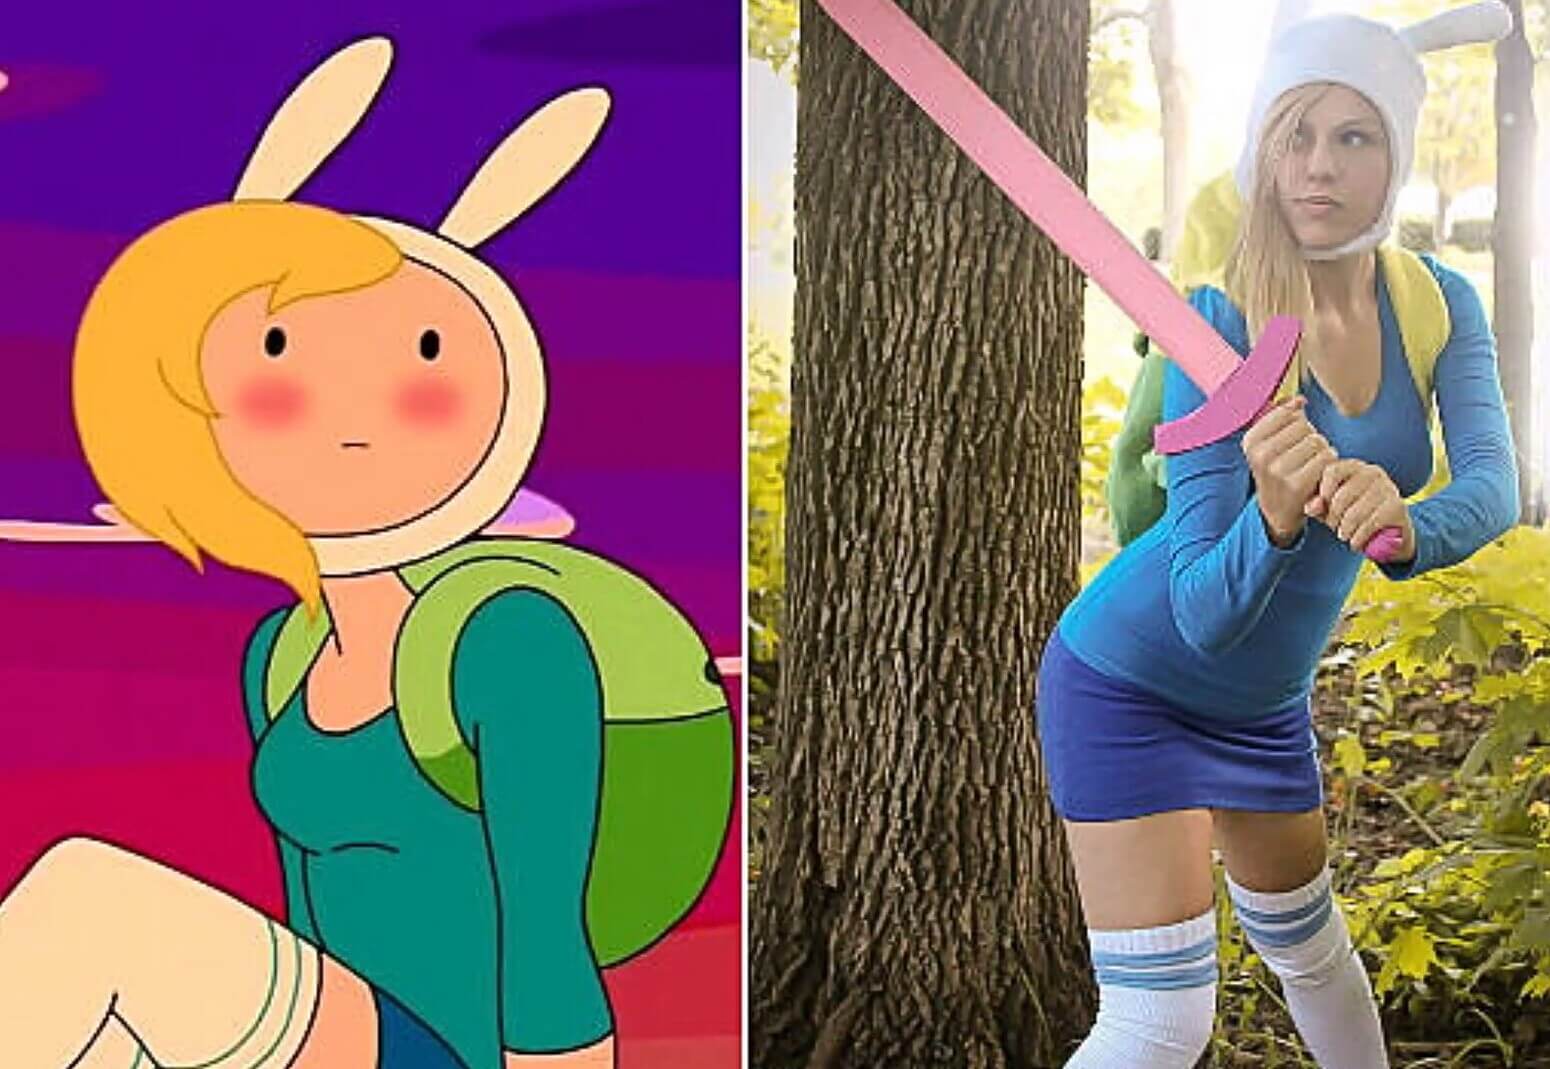 20 Amazing Cosplays That Look Extremely Similar To The Original Cartoons - We had never expected the cosplay version to be this fantastic.